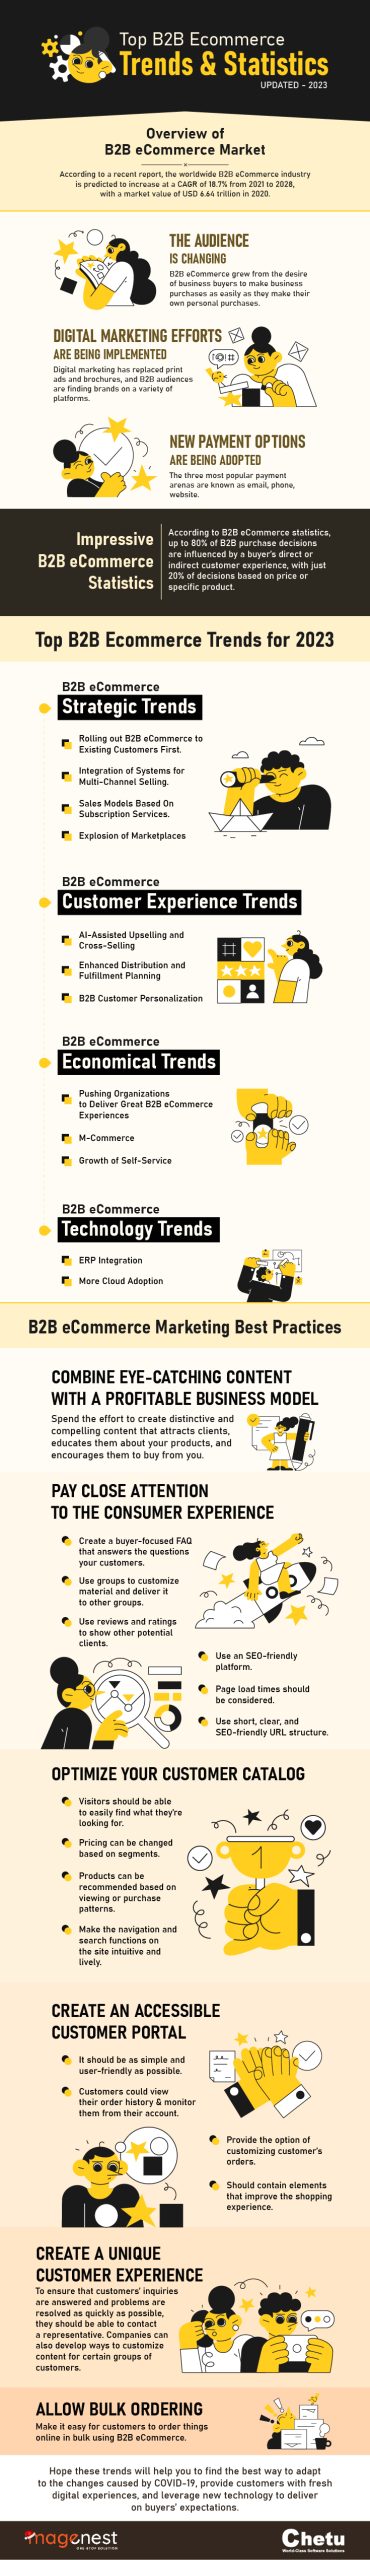 Top B2B eCommerce trends and Statistics infographic